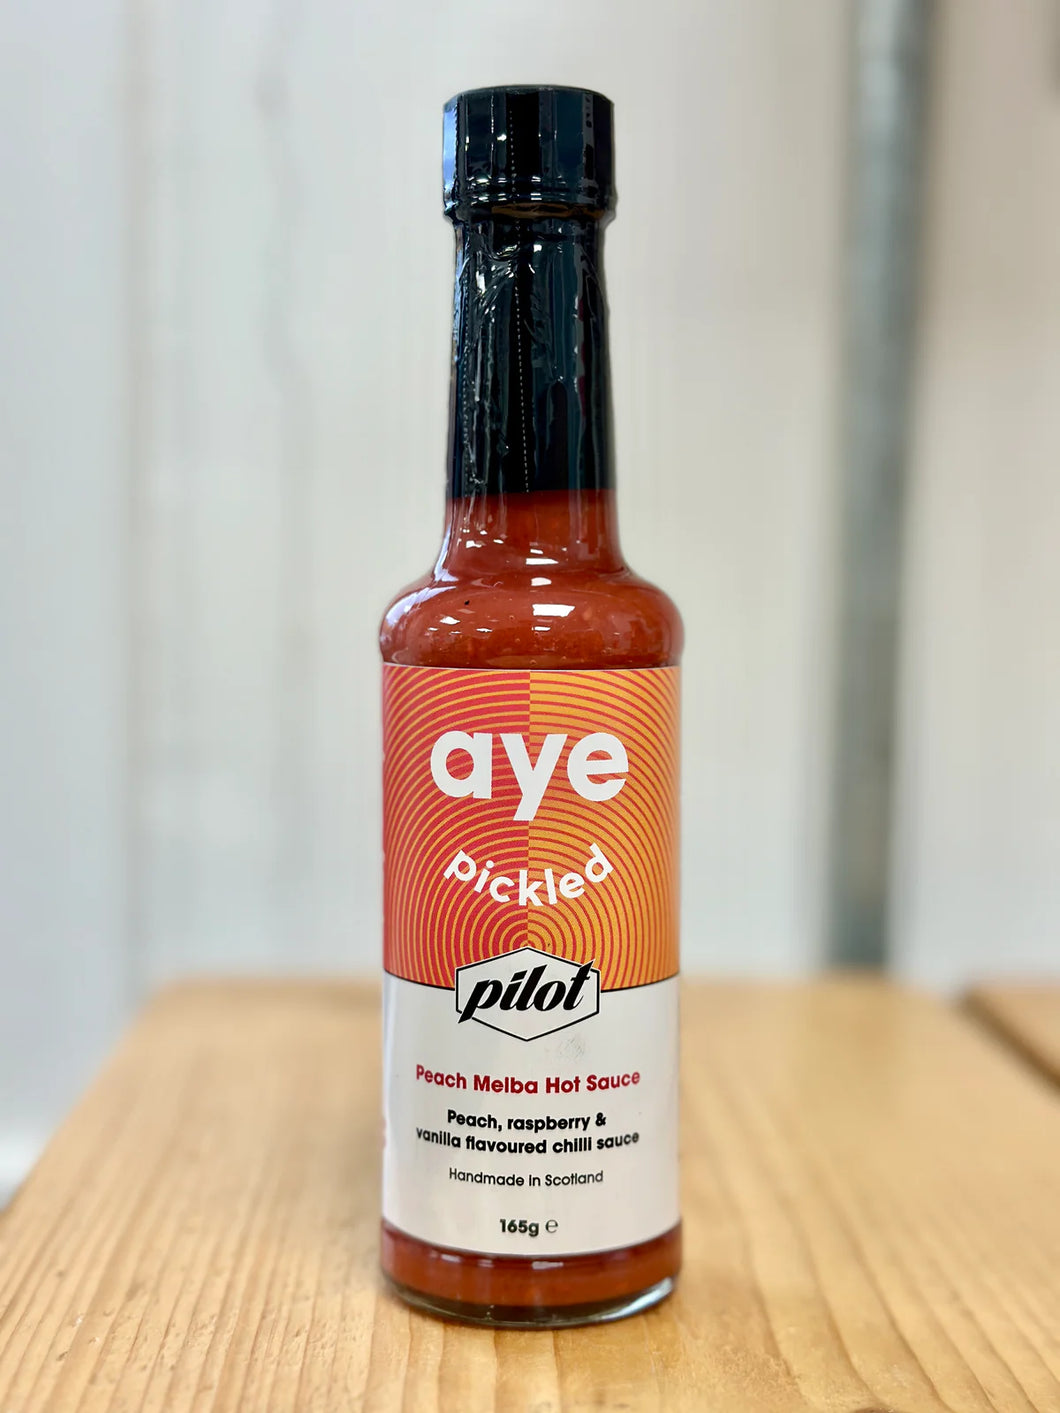 Aye Pickled Peach Melba Hot Sauce in partnership with Pilot Beer 165g